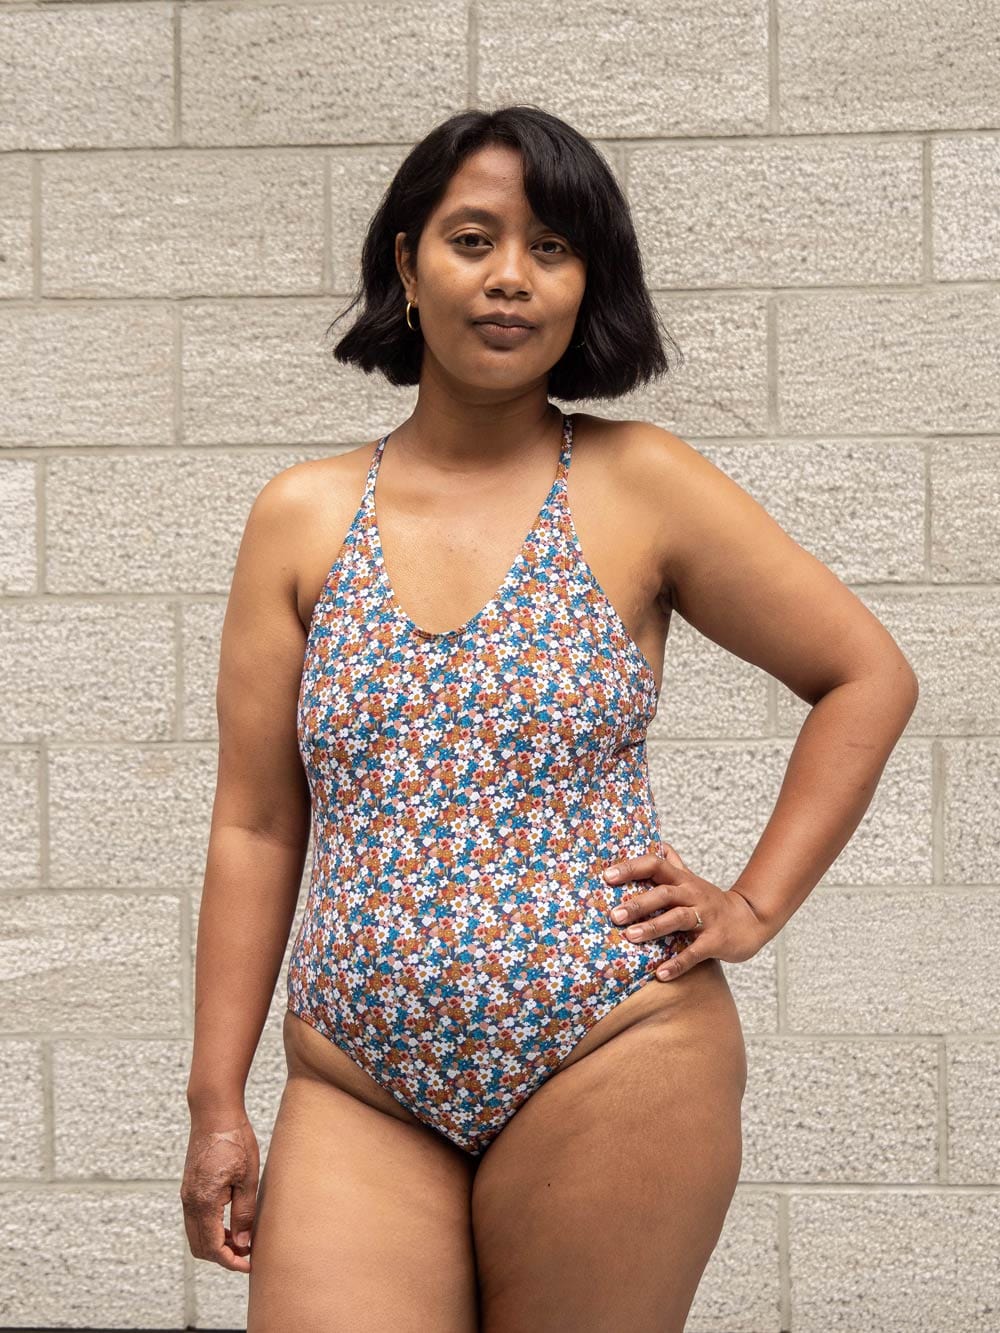 The One-Piece Swimsuit You Need Now - The Girl from Panama